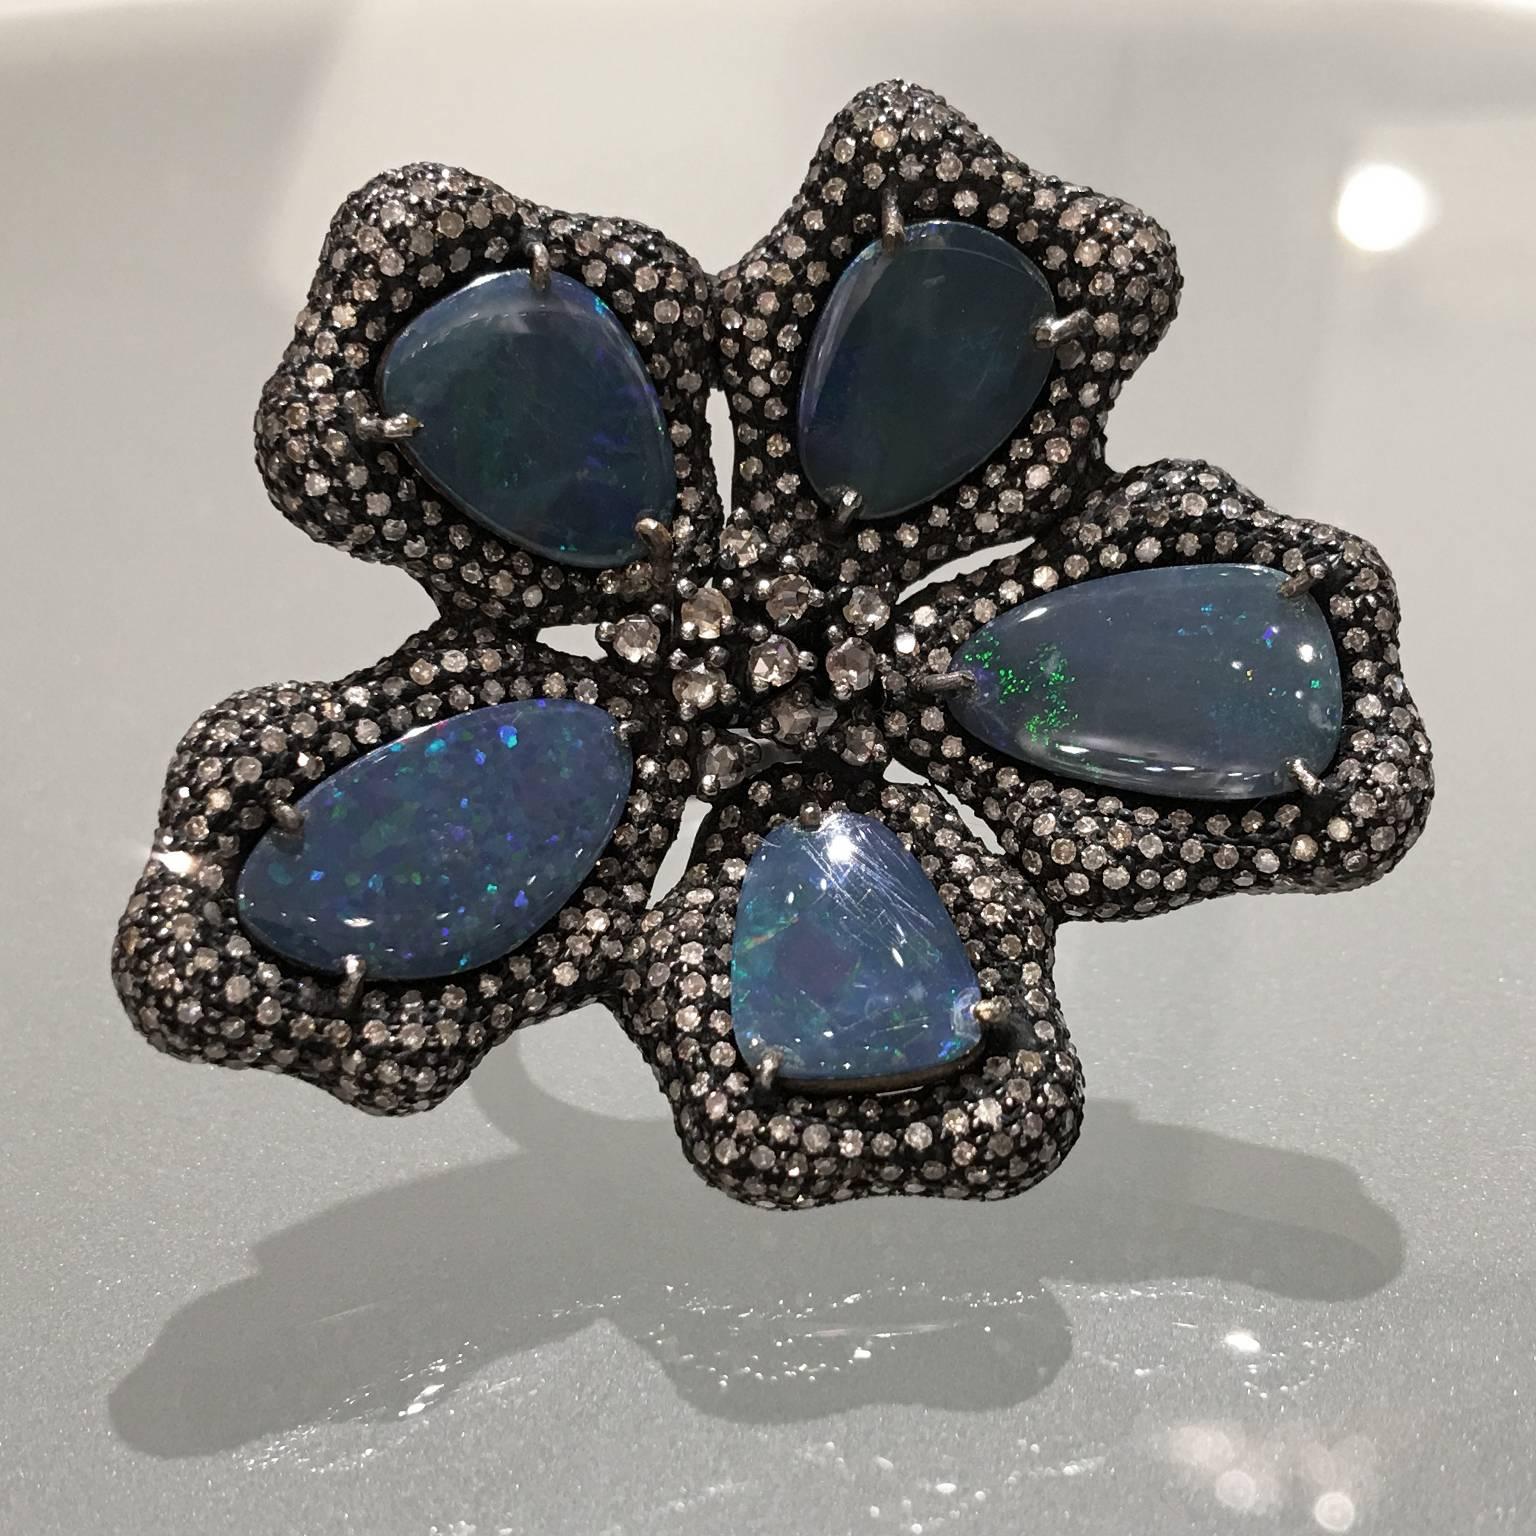 One of a Kind Ring crafted by jewelry designer Fern Freeman in rhodium-finished sterling silver with five black opal doublet petals totaling 11.71 carats and surrounded by 3.57 carats of brilliant-cut and rose-cut diamonds.  Size 7.25 (can be sized).